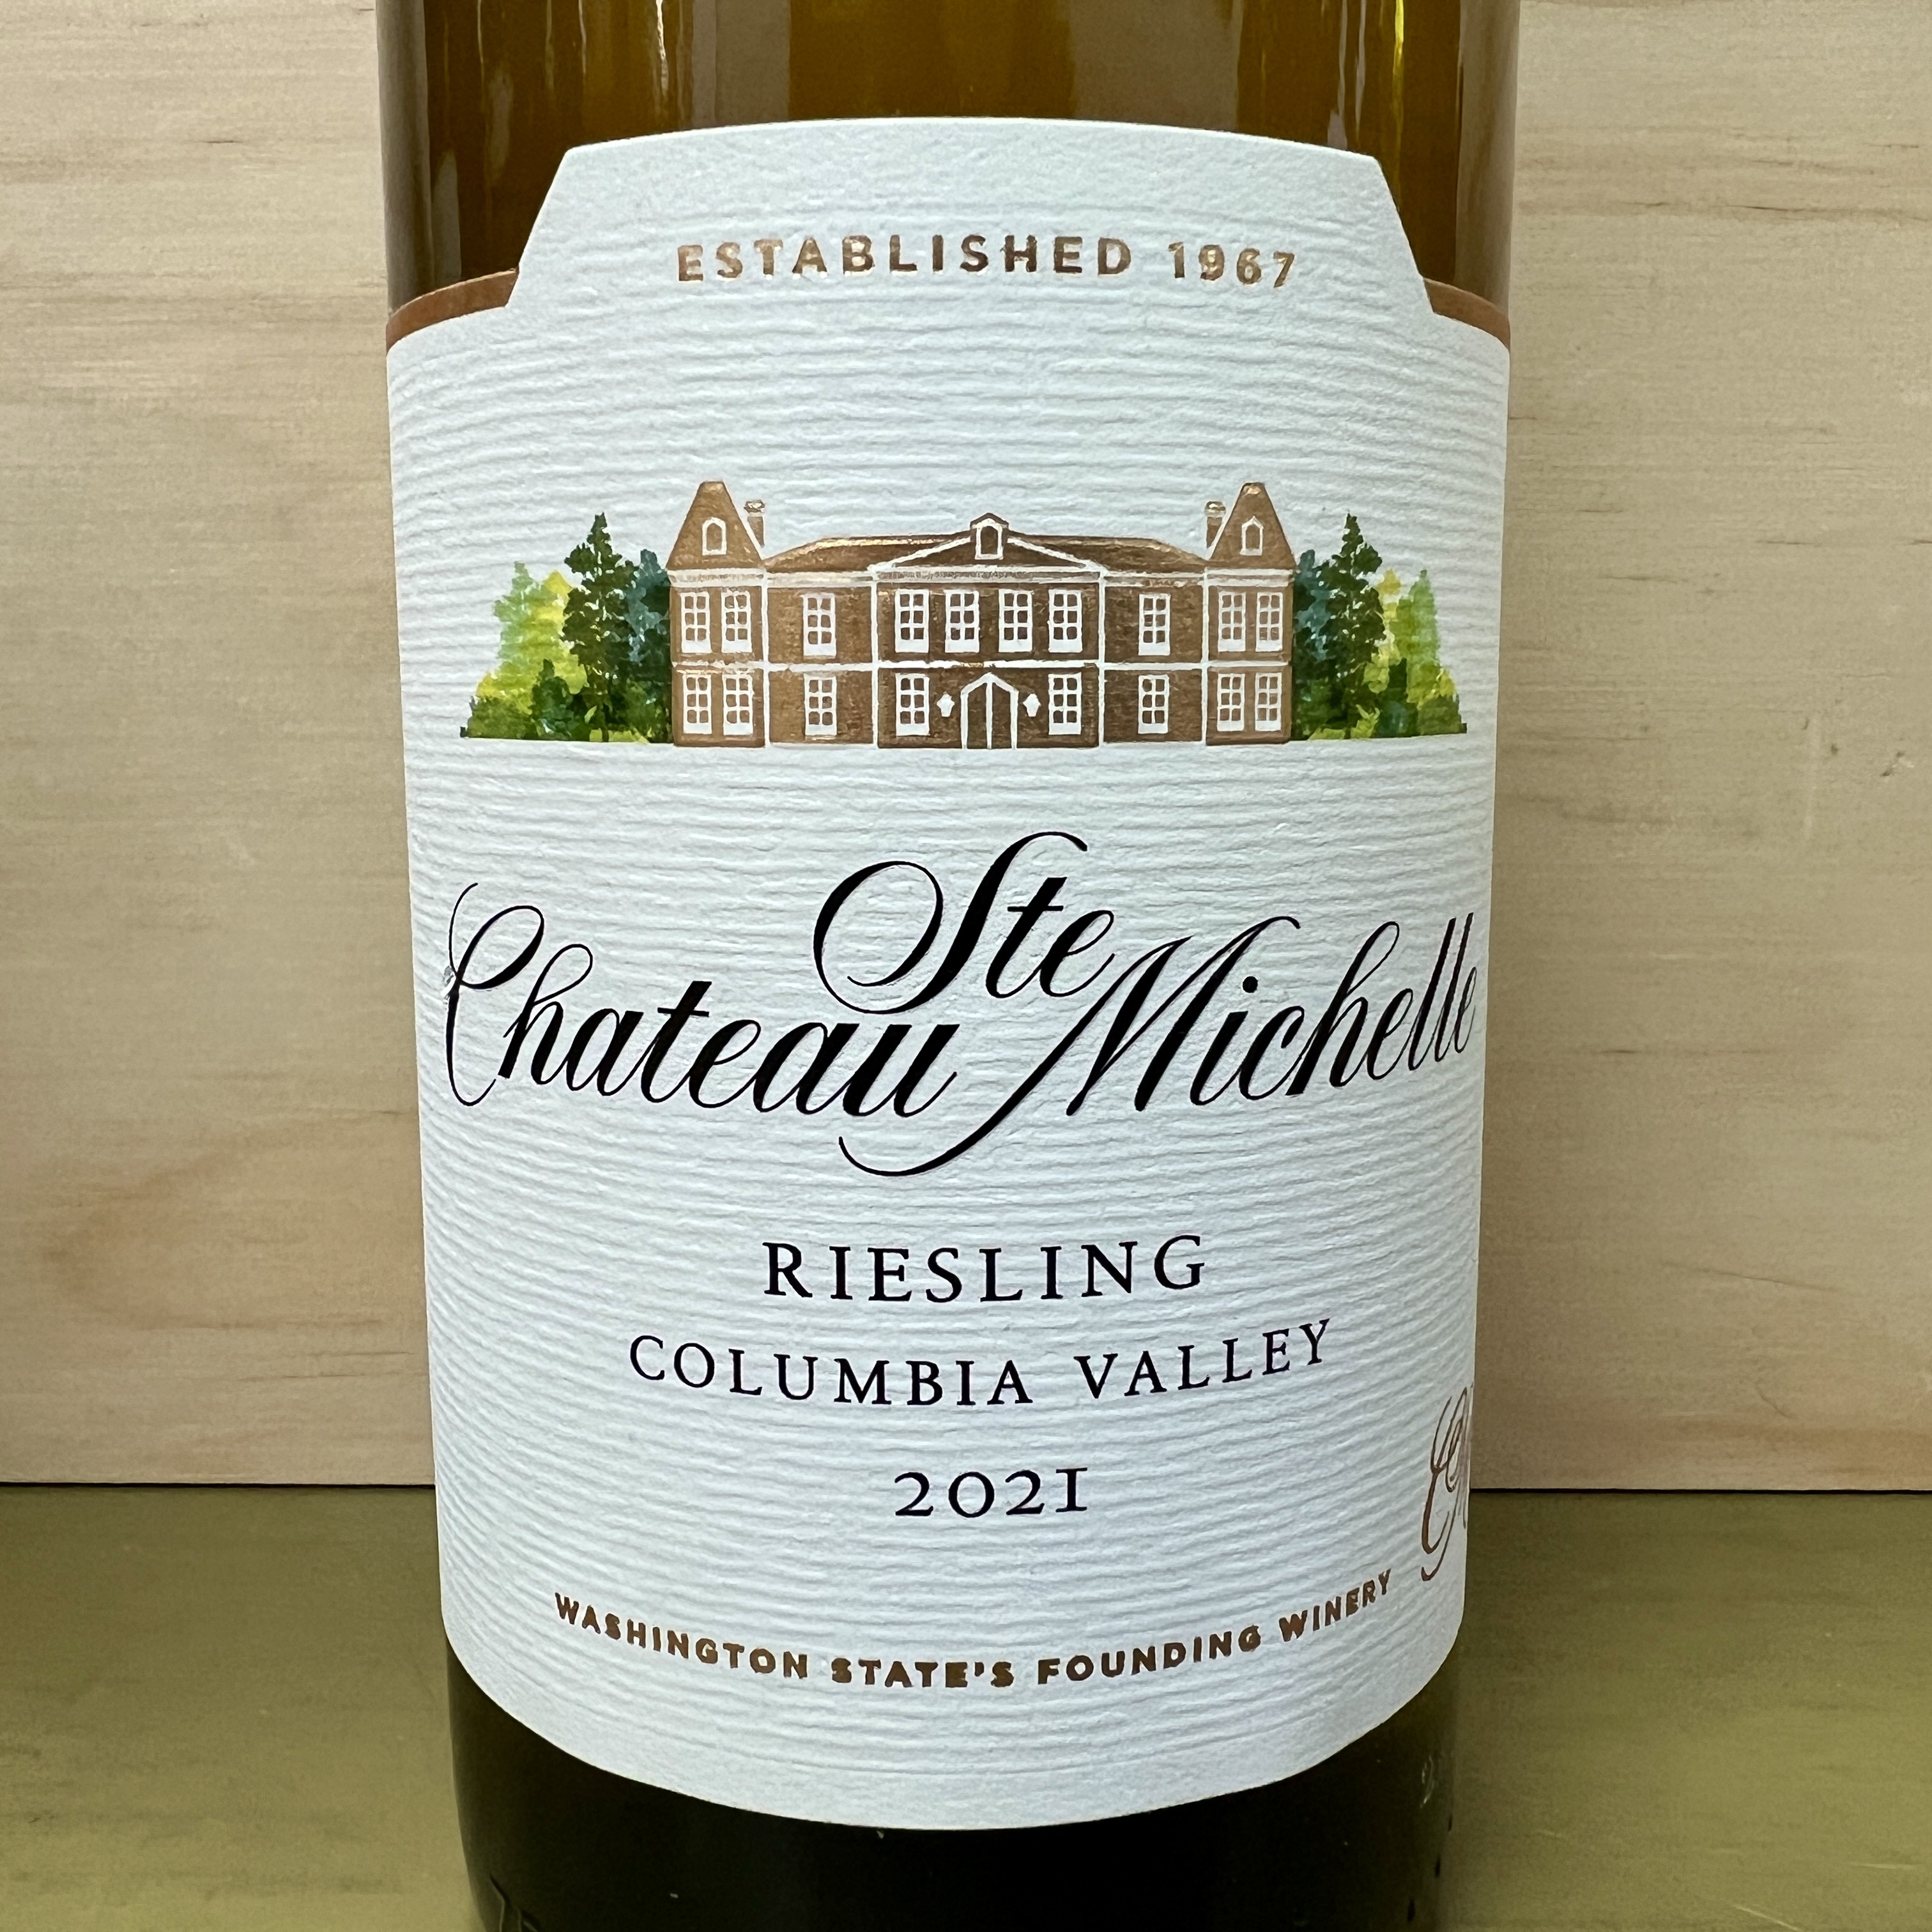 Chateau Ste Michelle Riesling Columbia Valley 2021